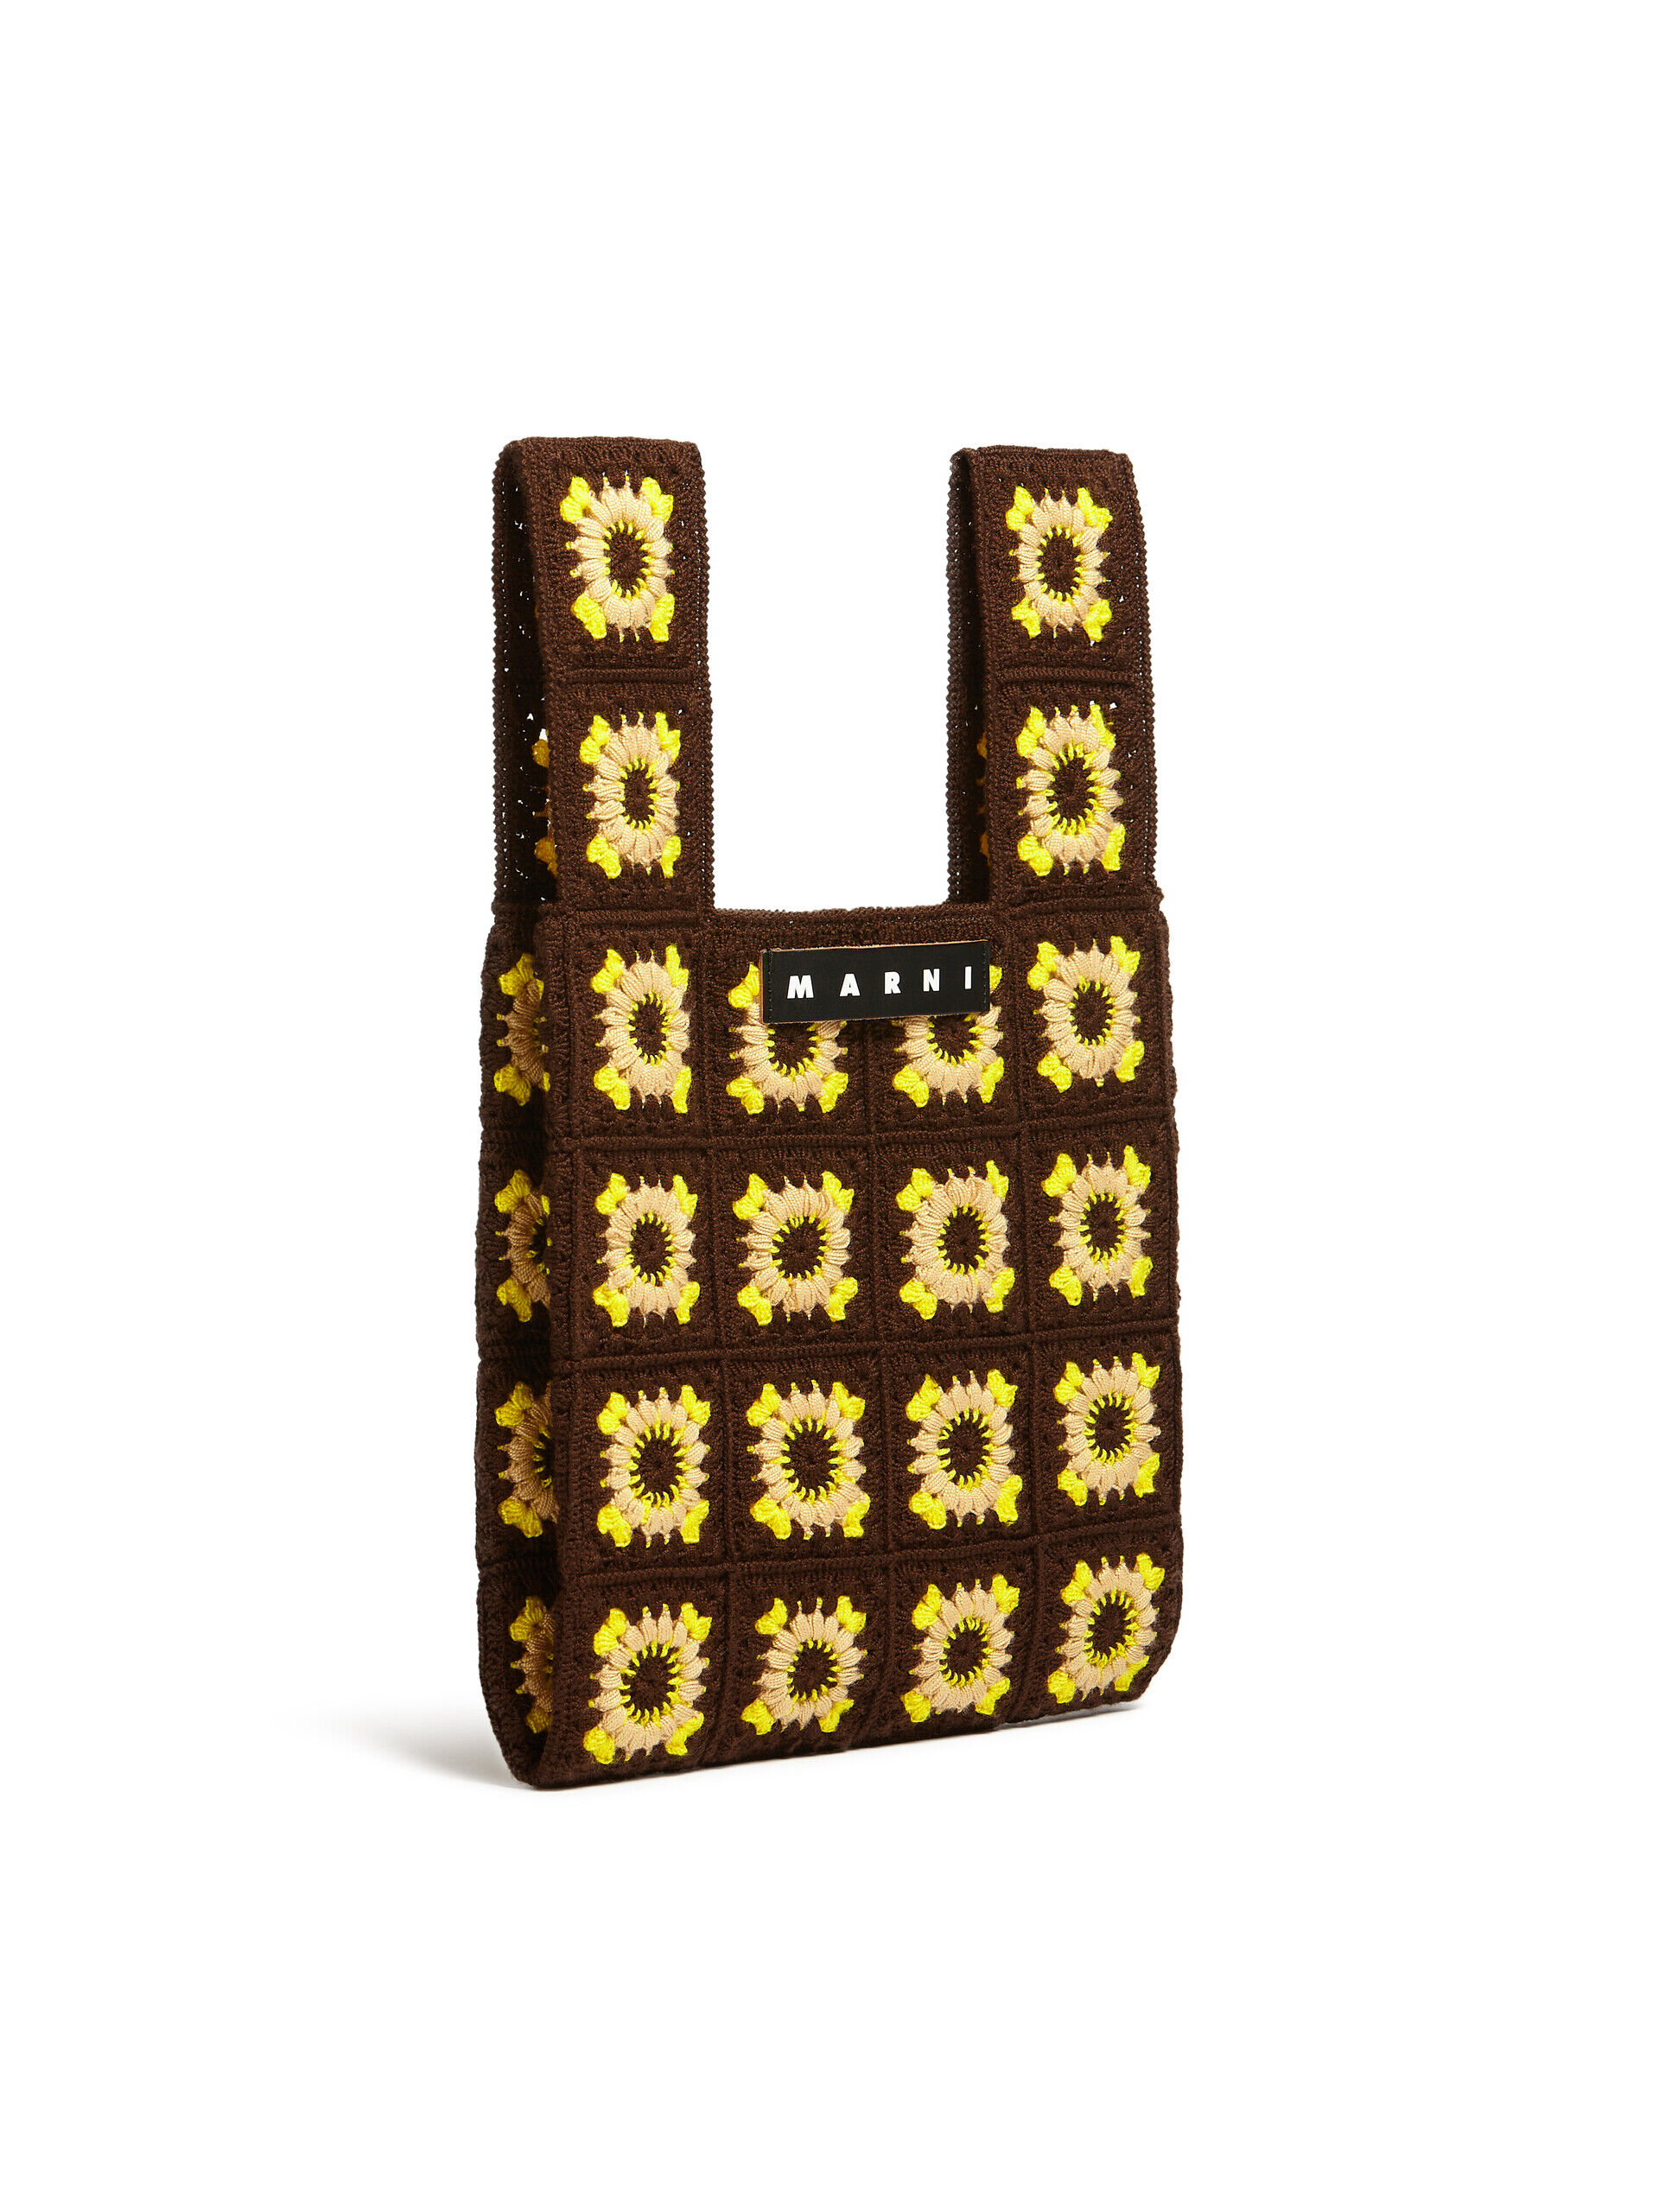 View all products | Marni